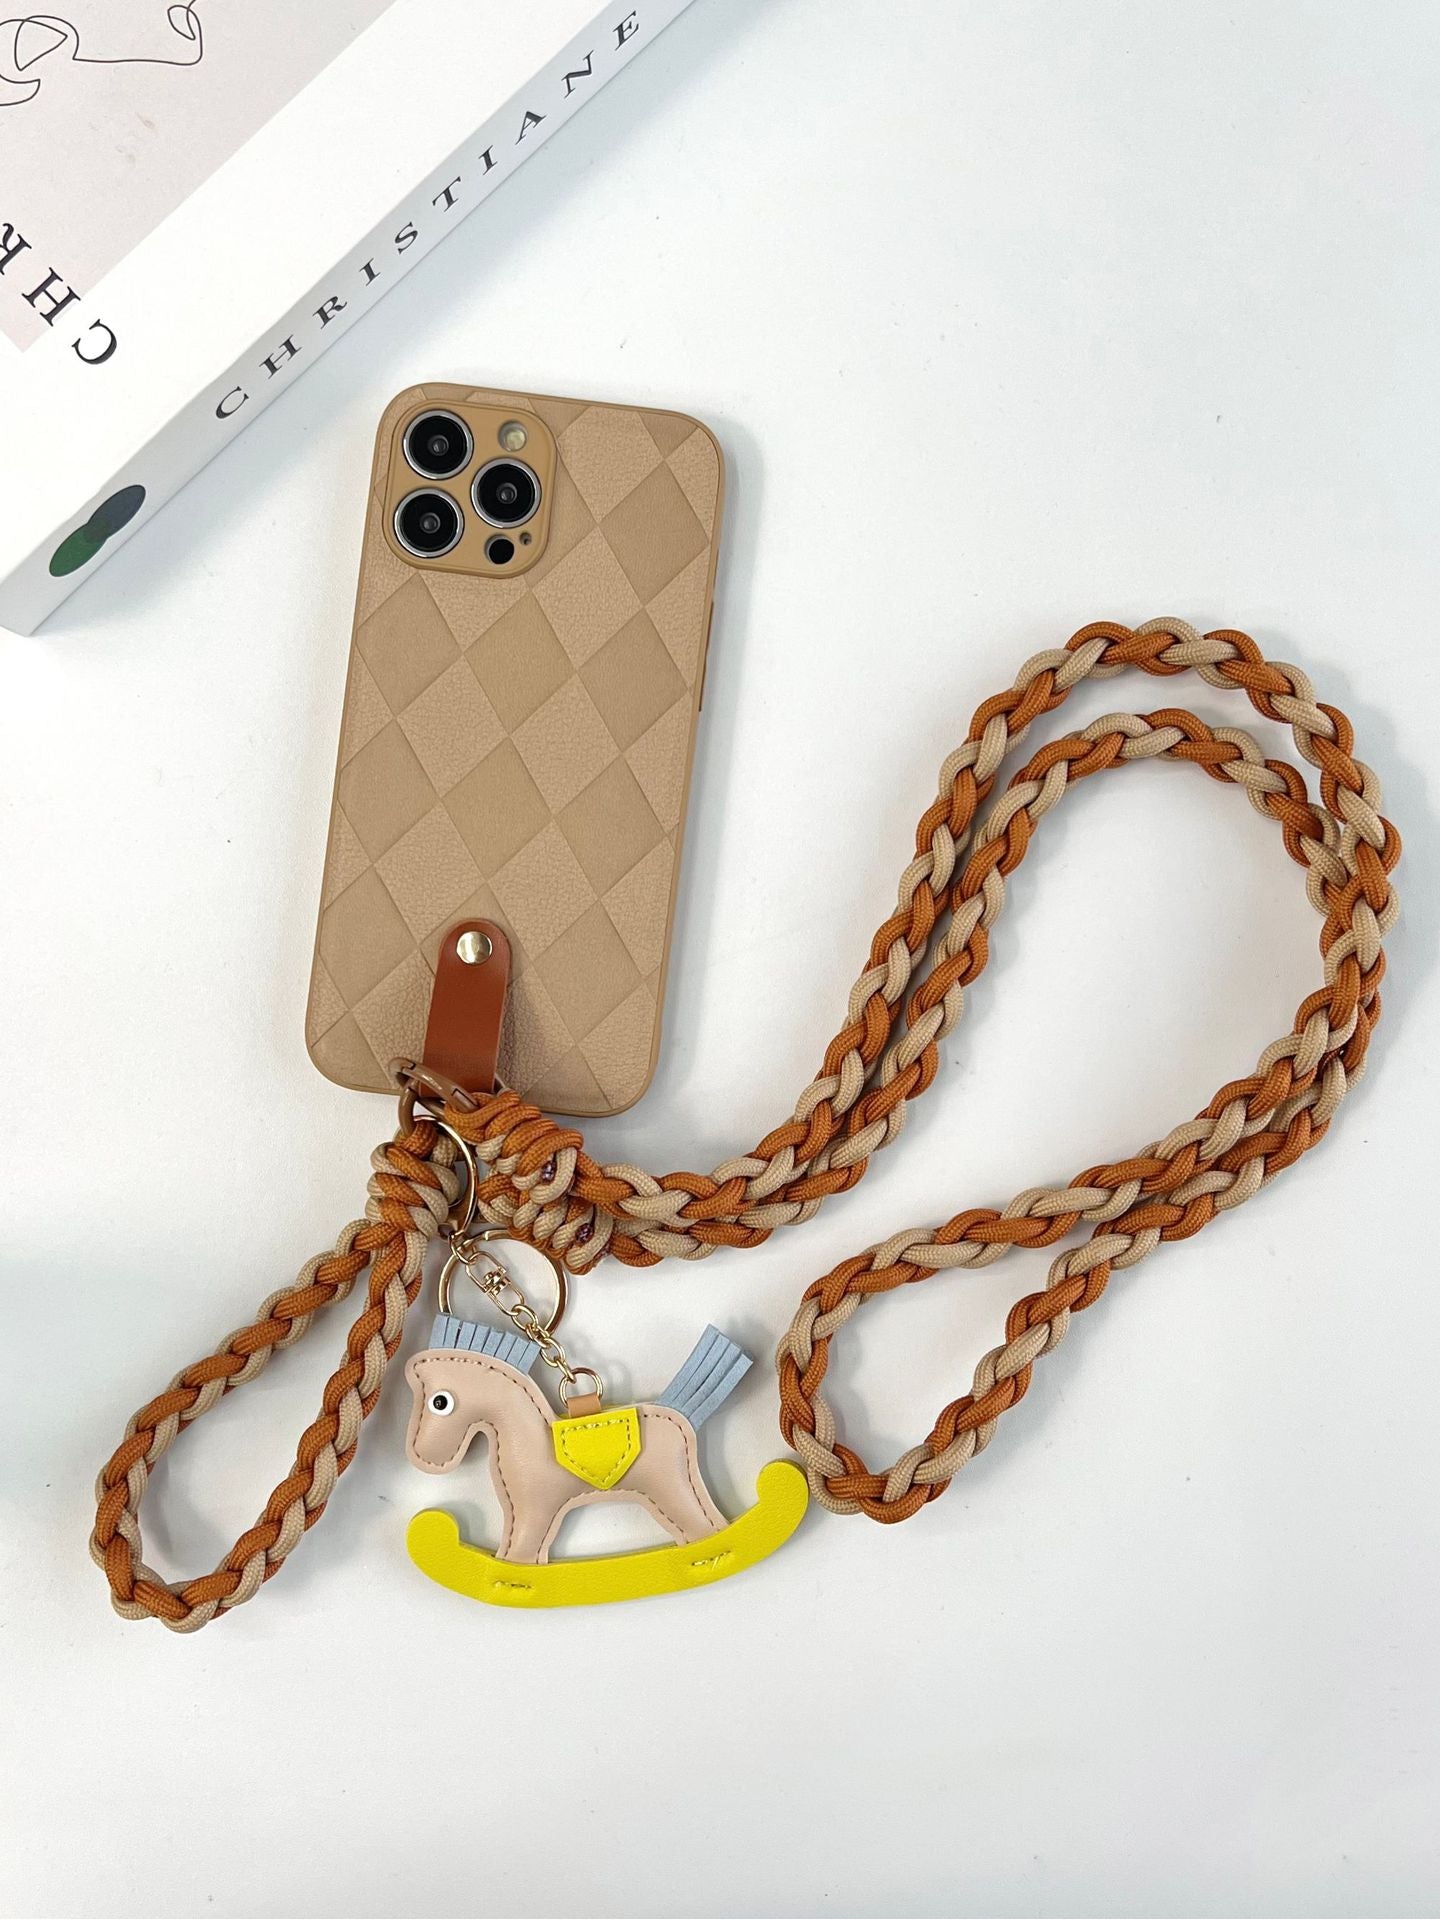 Rocking Horse Braided Rope Phone Case for iPhone - Brandy Trendy Hub